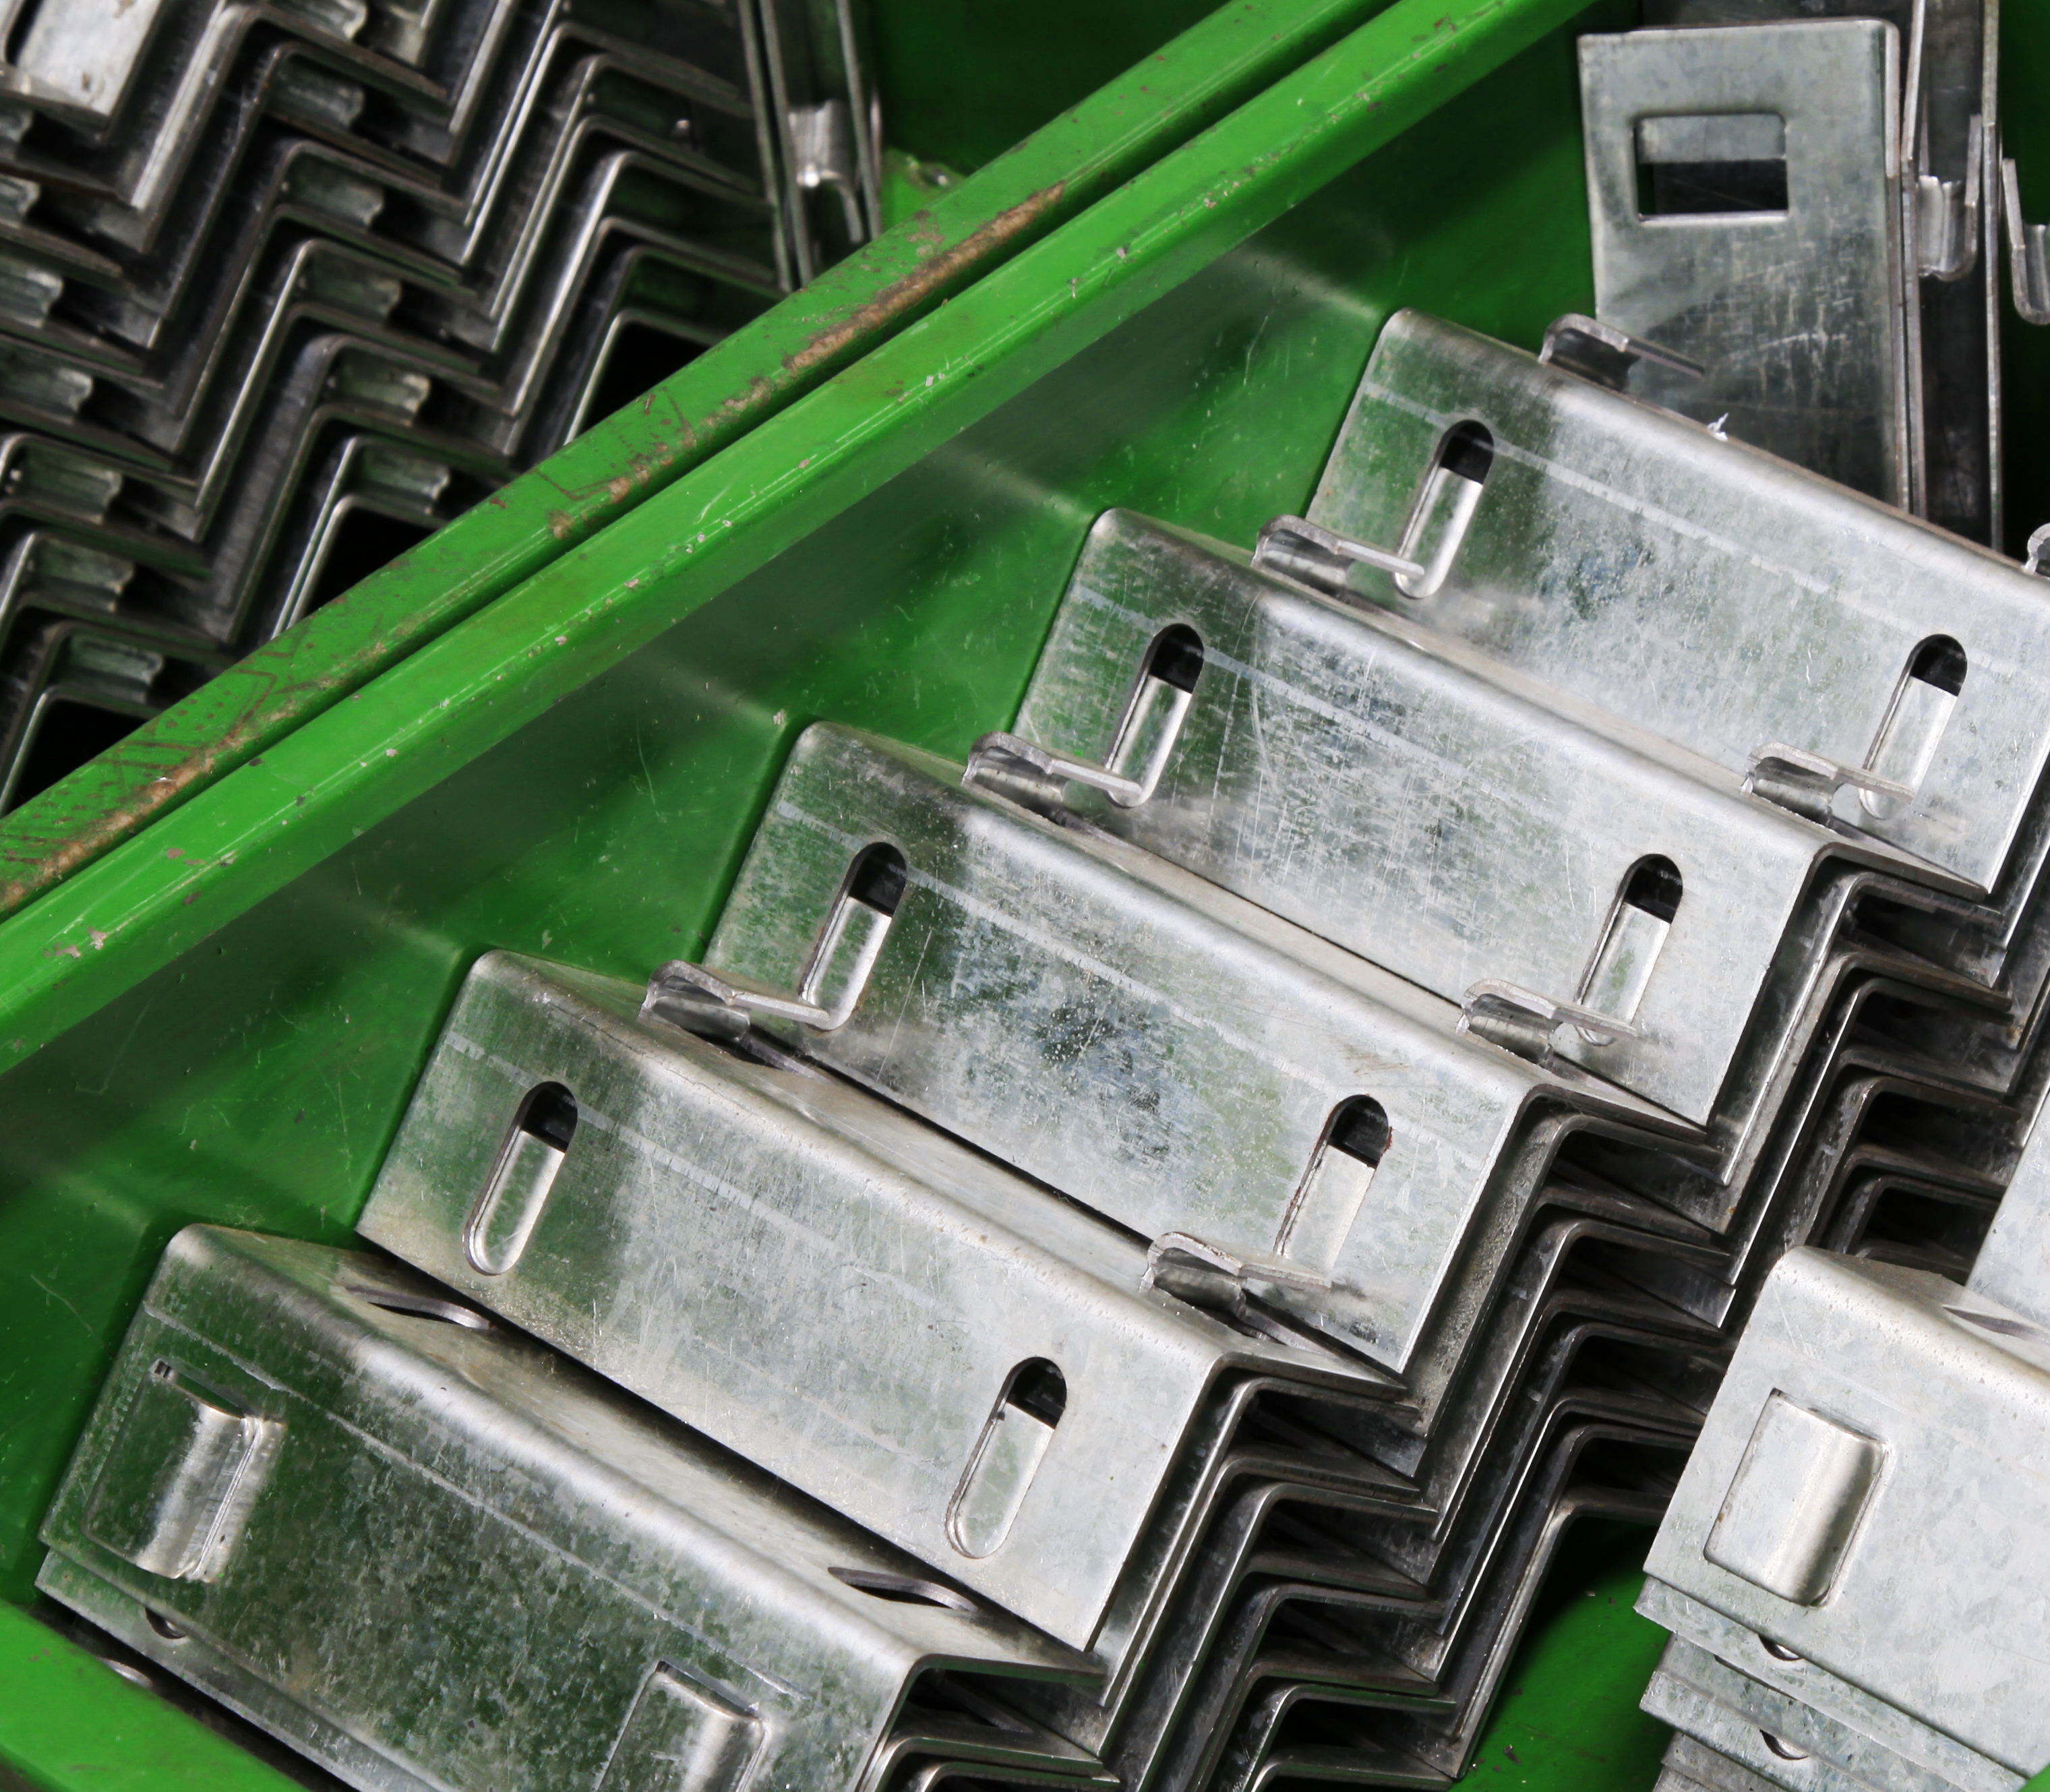 Metal Stamping Companies Use Heavy Steel Containers